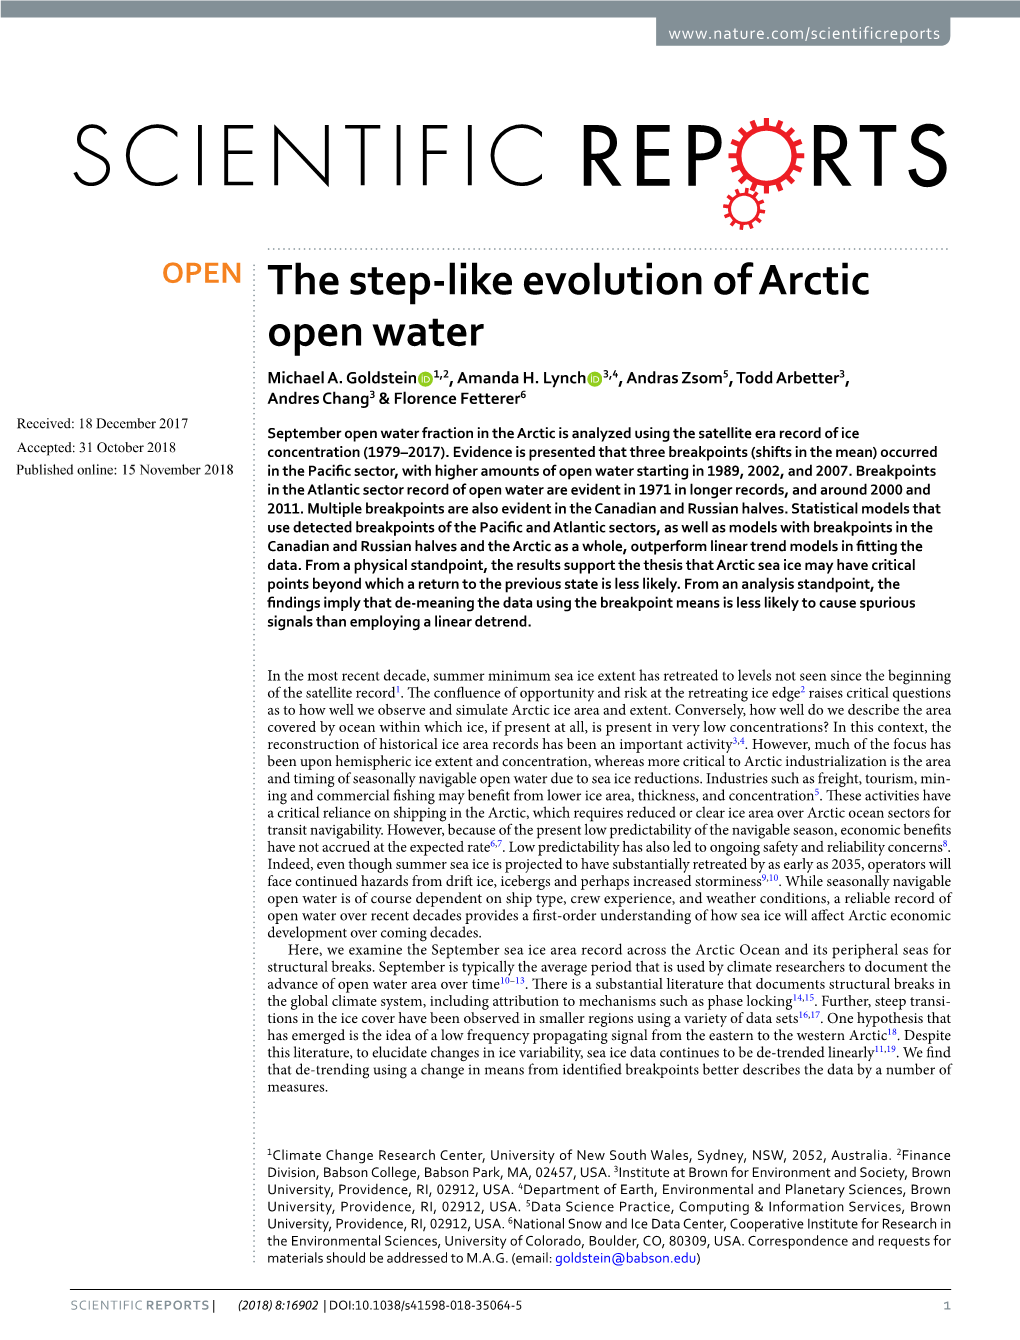 The Step-Like Evolution of Arctic Open Water Michael A